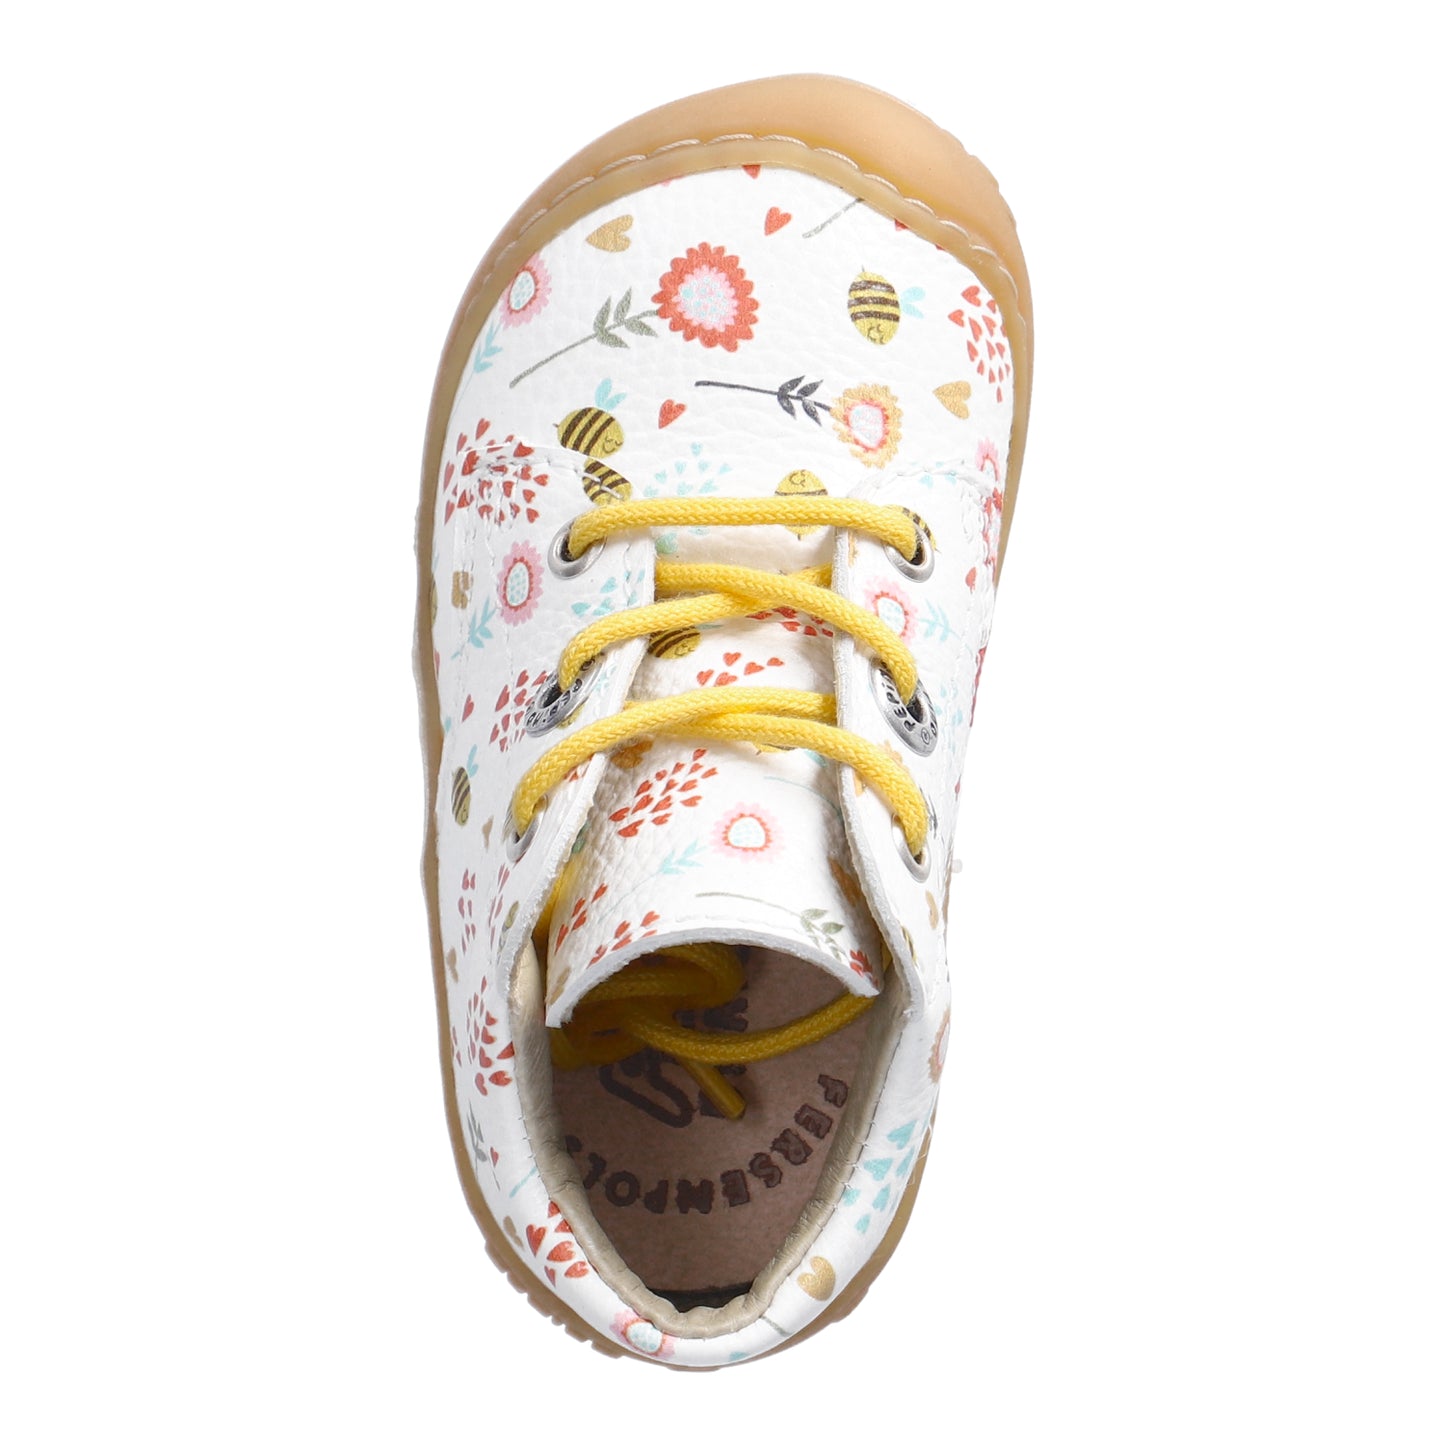 Cory Dots Lace Up Spring Pattern Leather Shoe